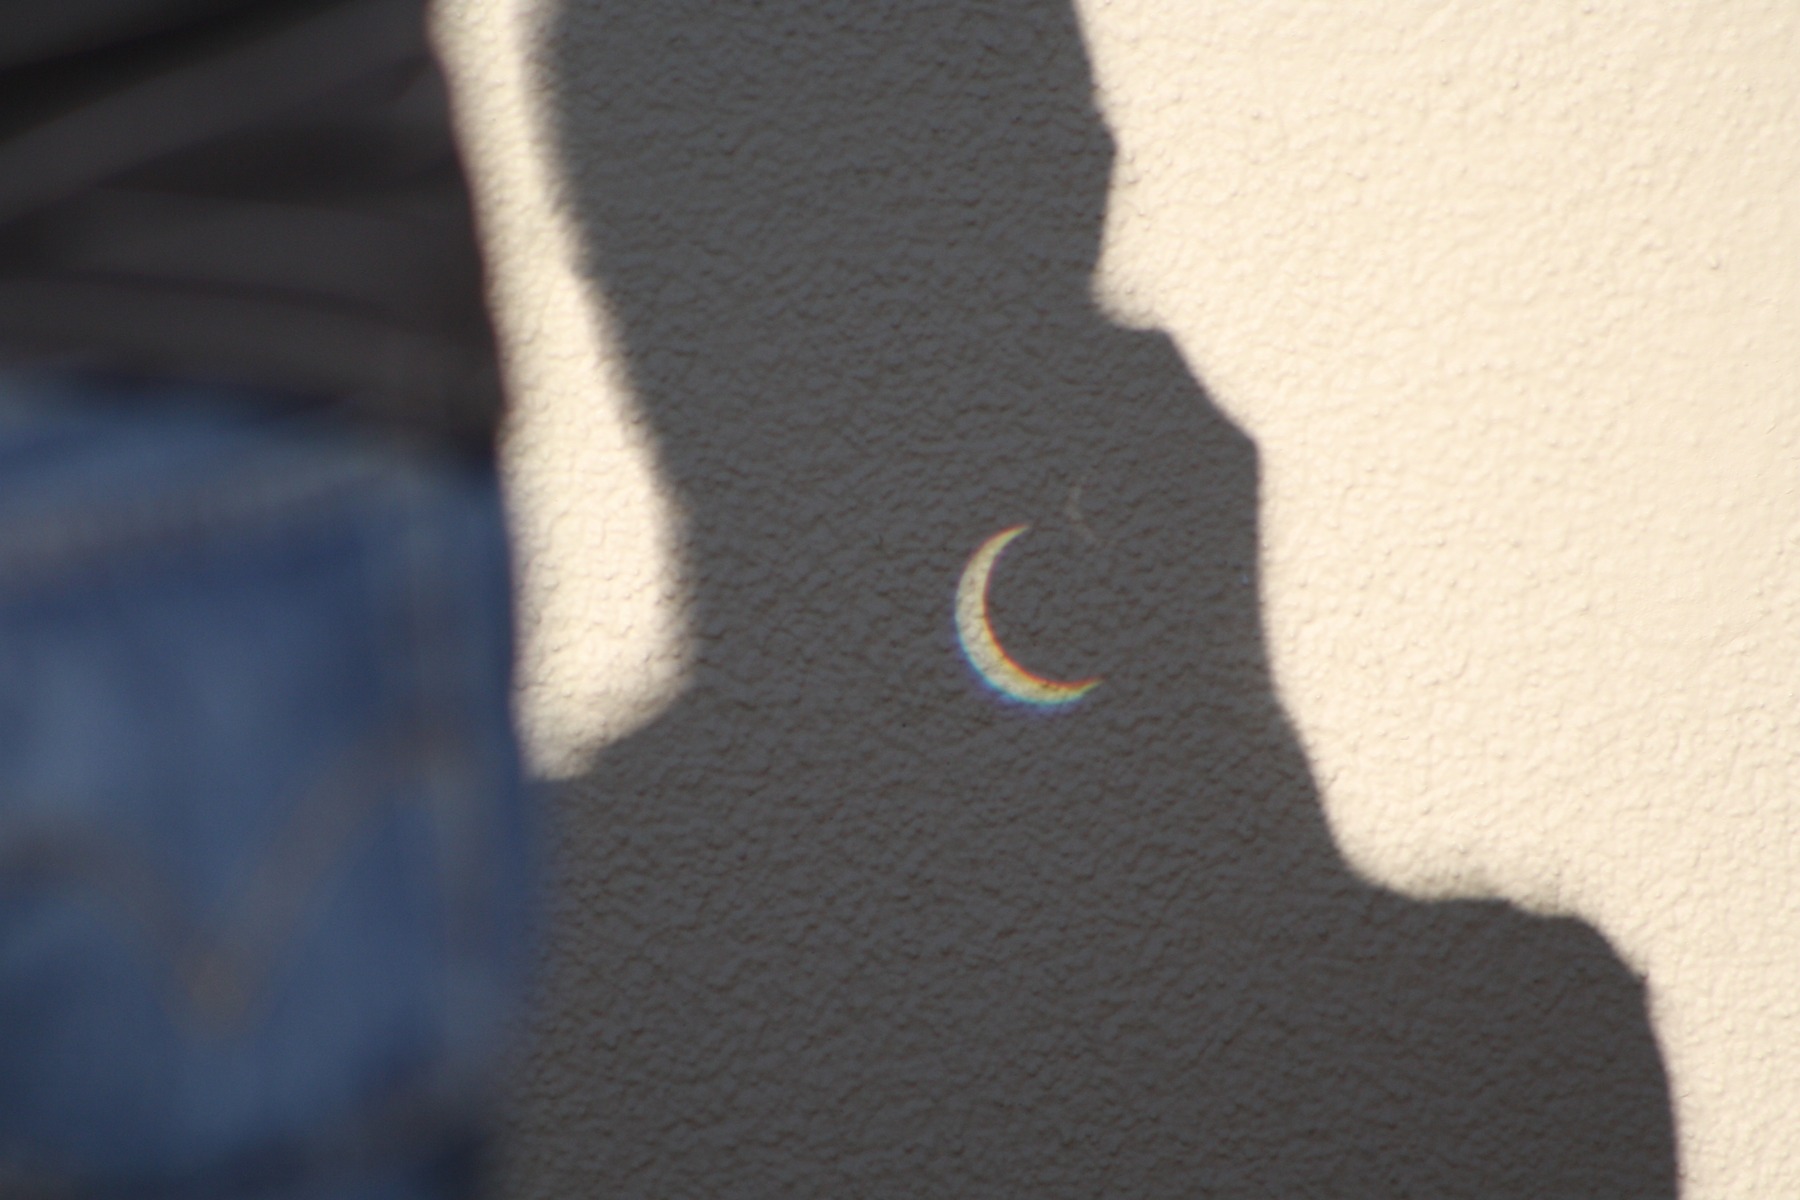 How To Make PINhole Projector For Eclipse